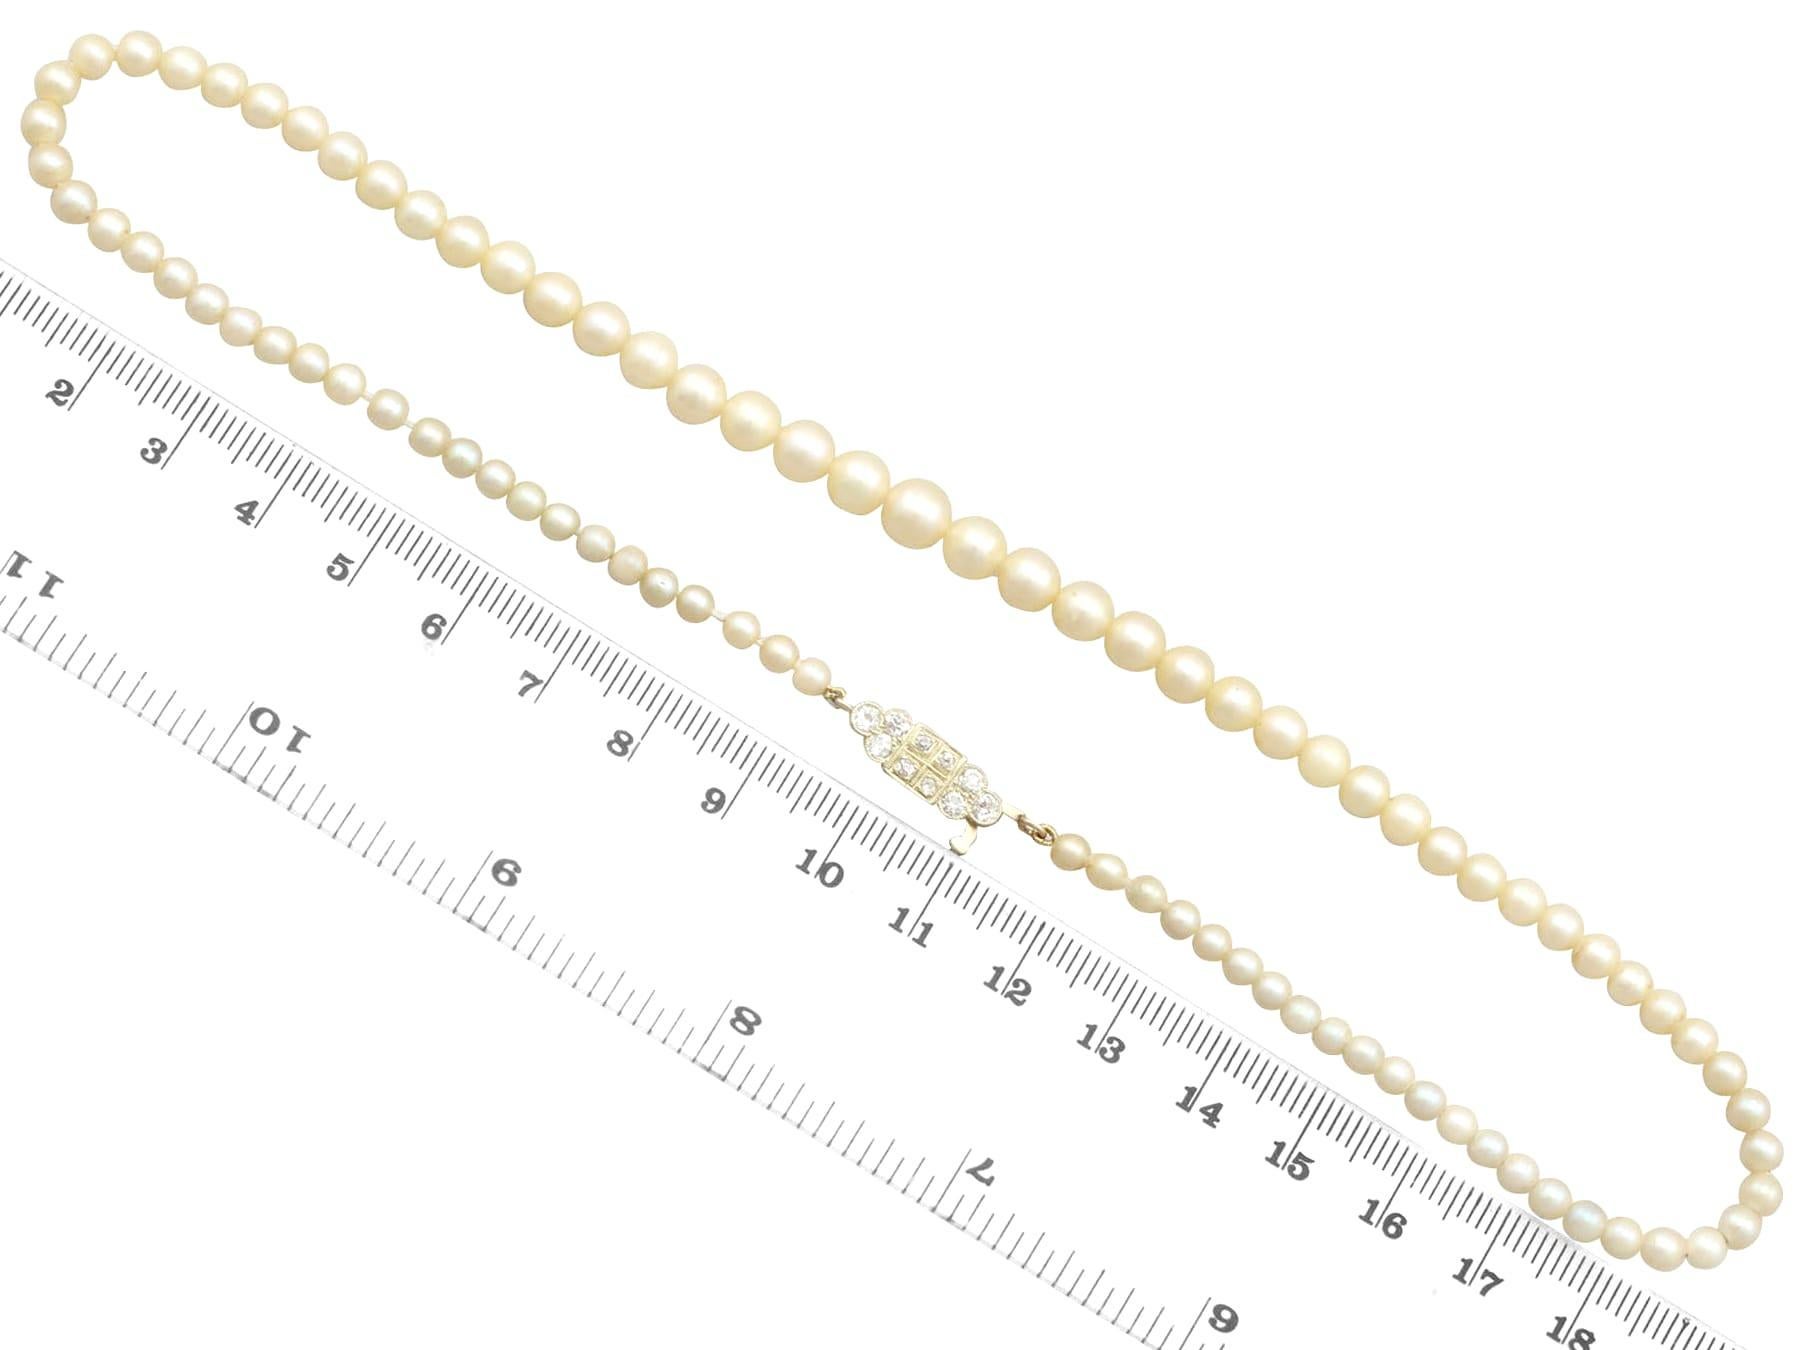 Single Strand Pearl Necklace Diamond Gold Clasp In Excellent Condition For Sale In Jesmond, Newcastle Upon Tyne